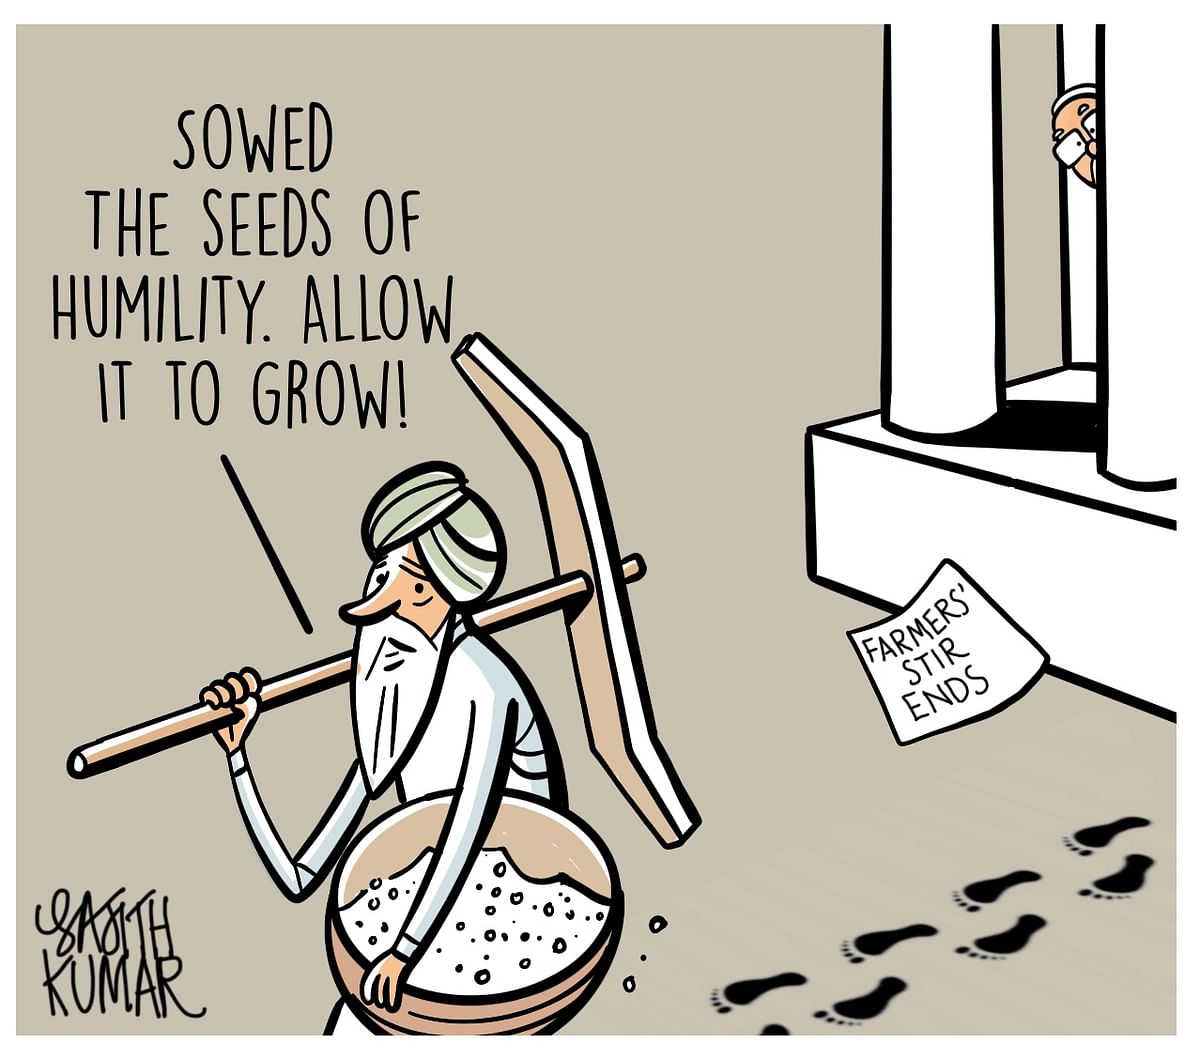 DH Toon | Farmers sow seeds of humility, end year-long agitation